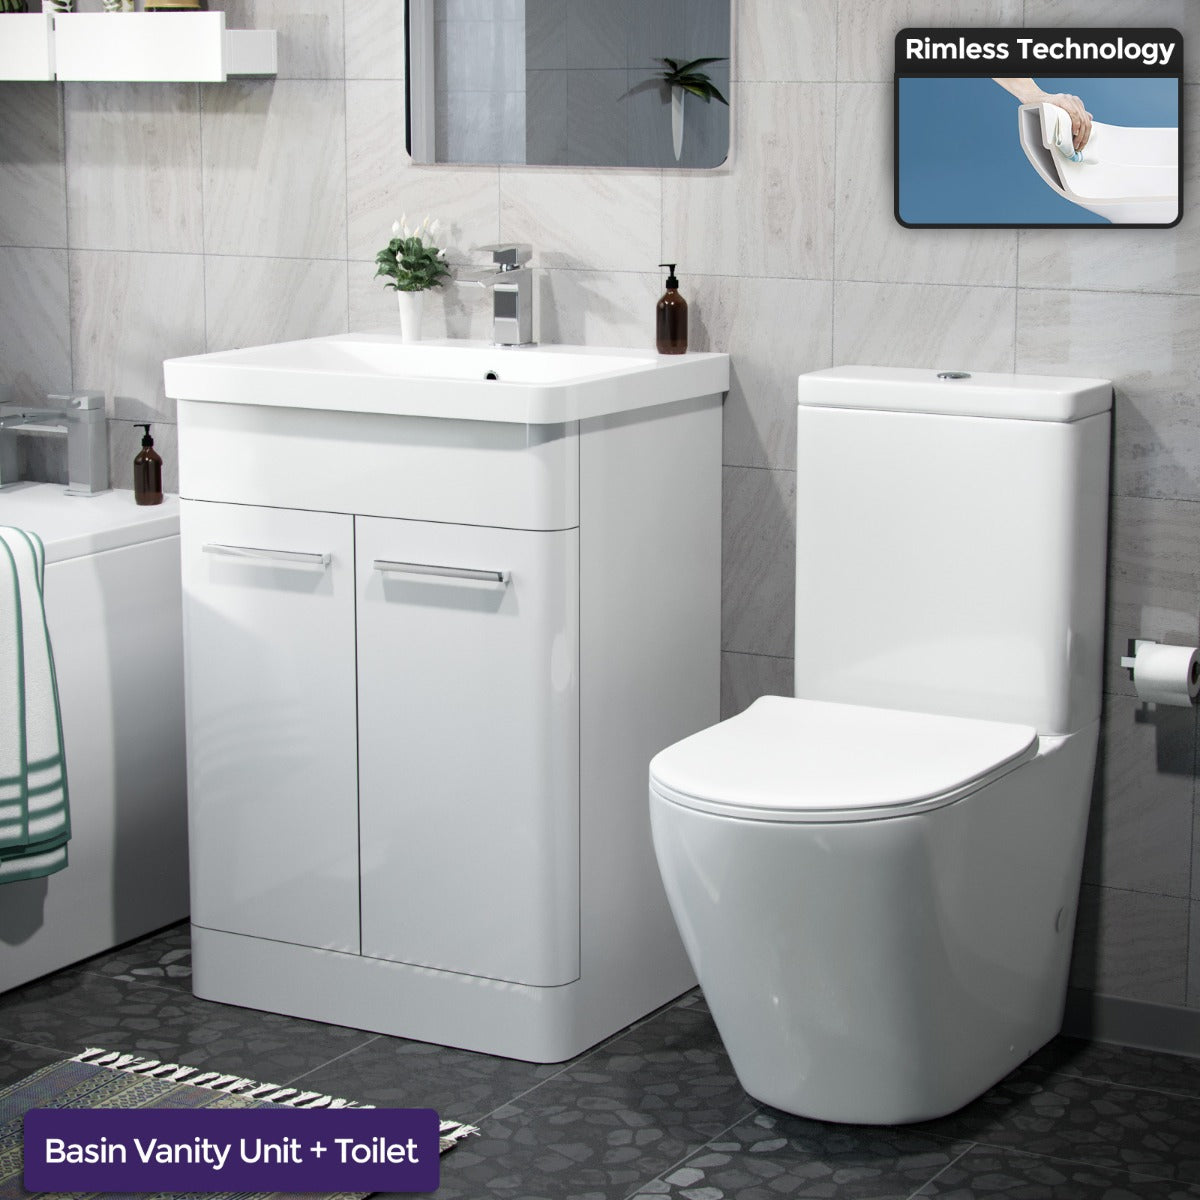 Afern 600mm Freestanding Vanity Unit, Curved Rimless Close Coupled Toilet White